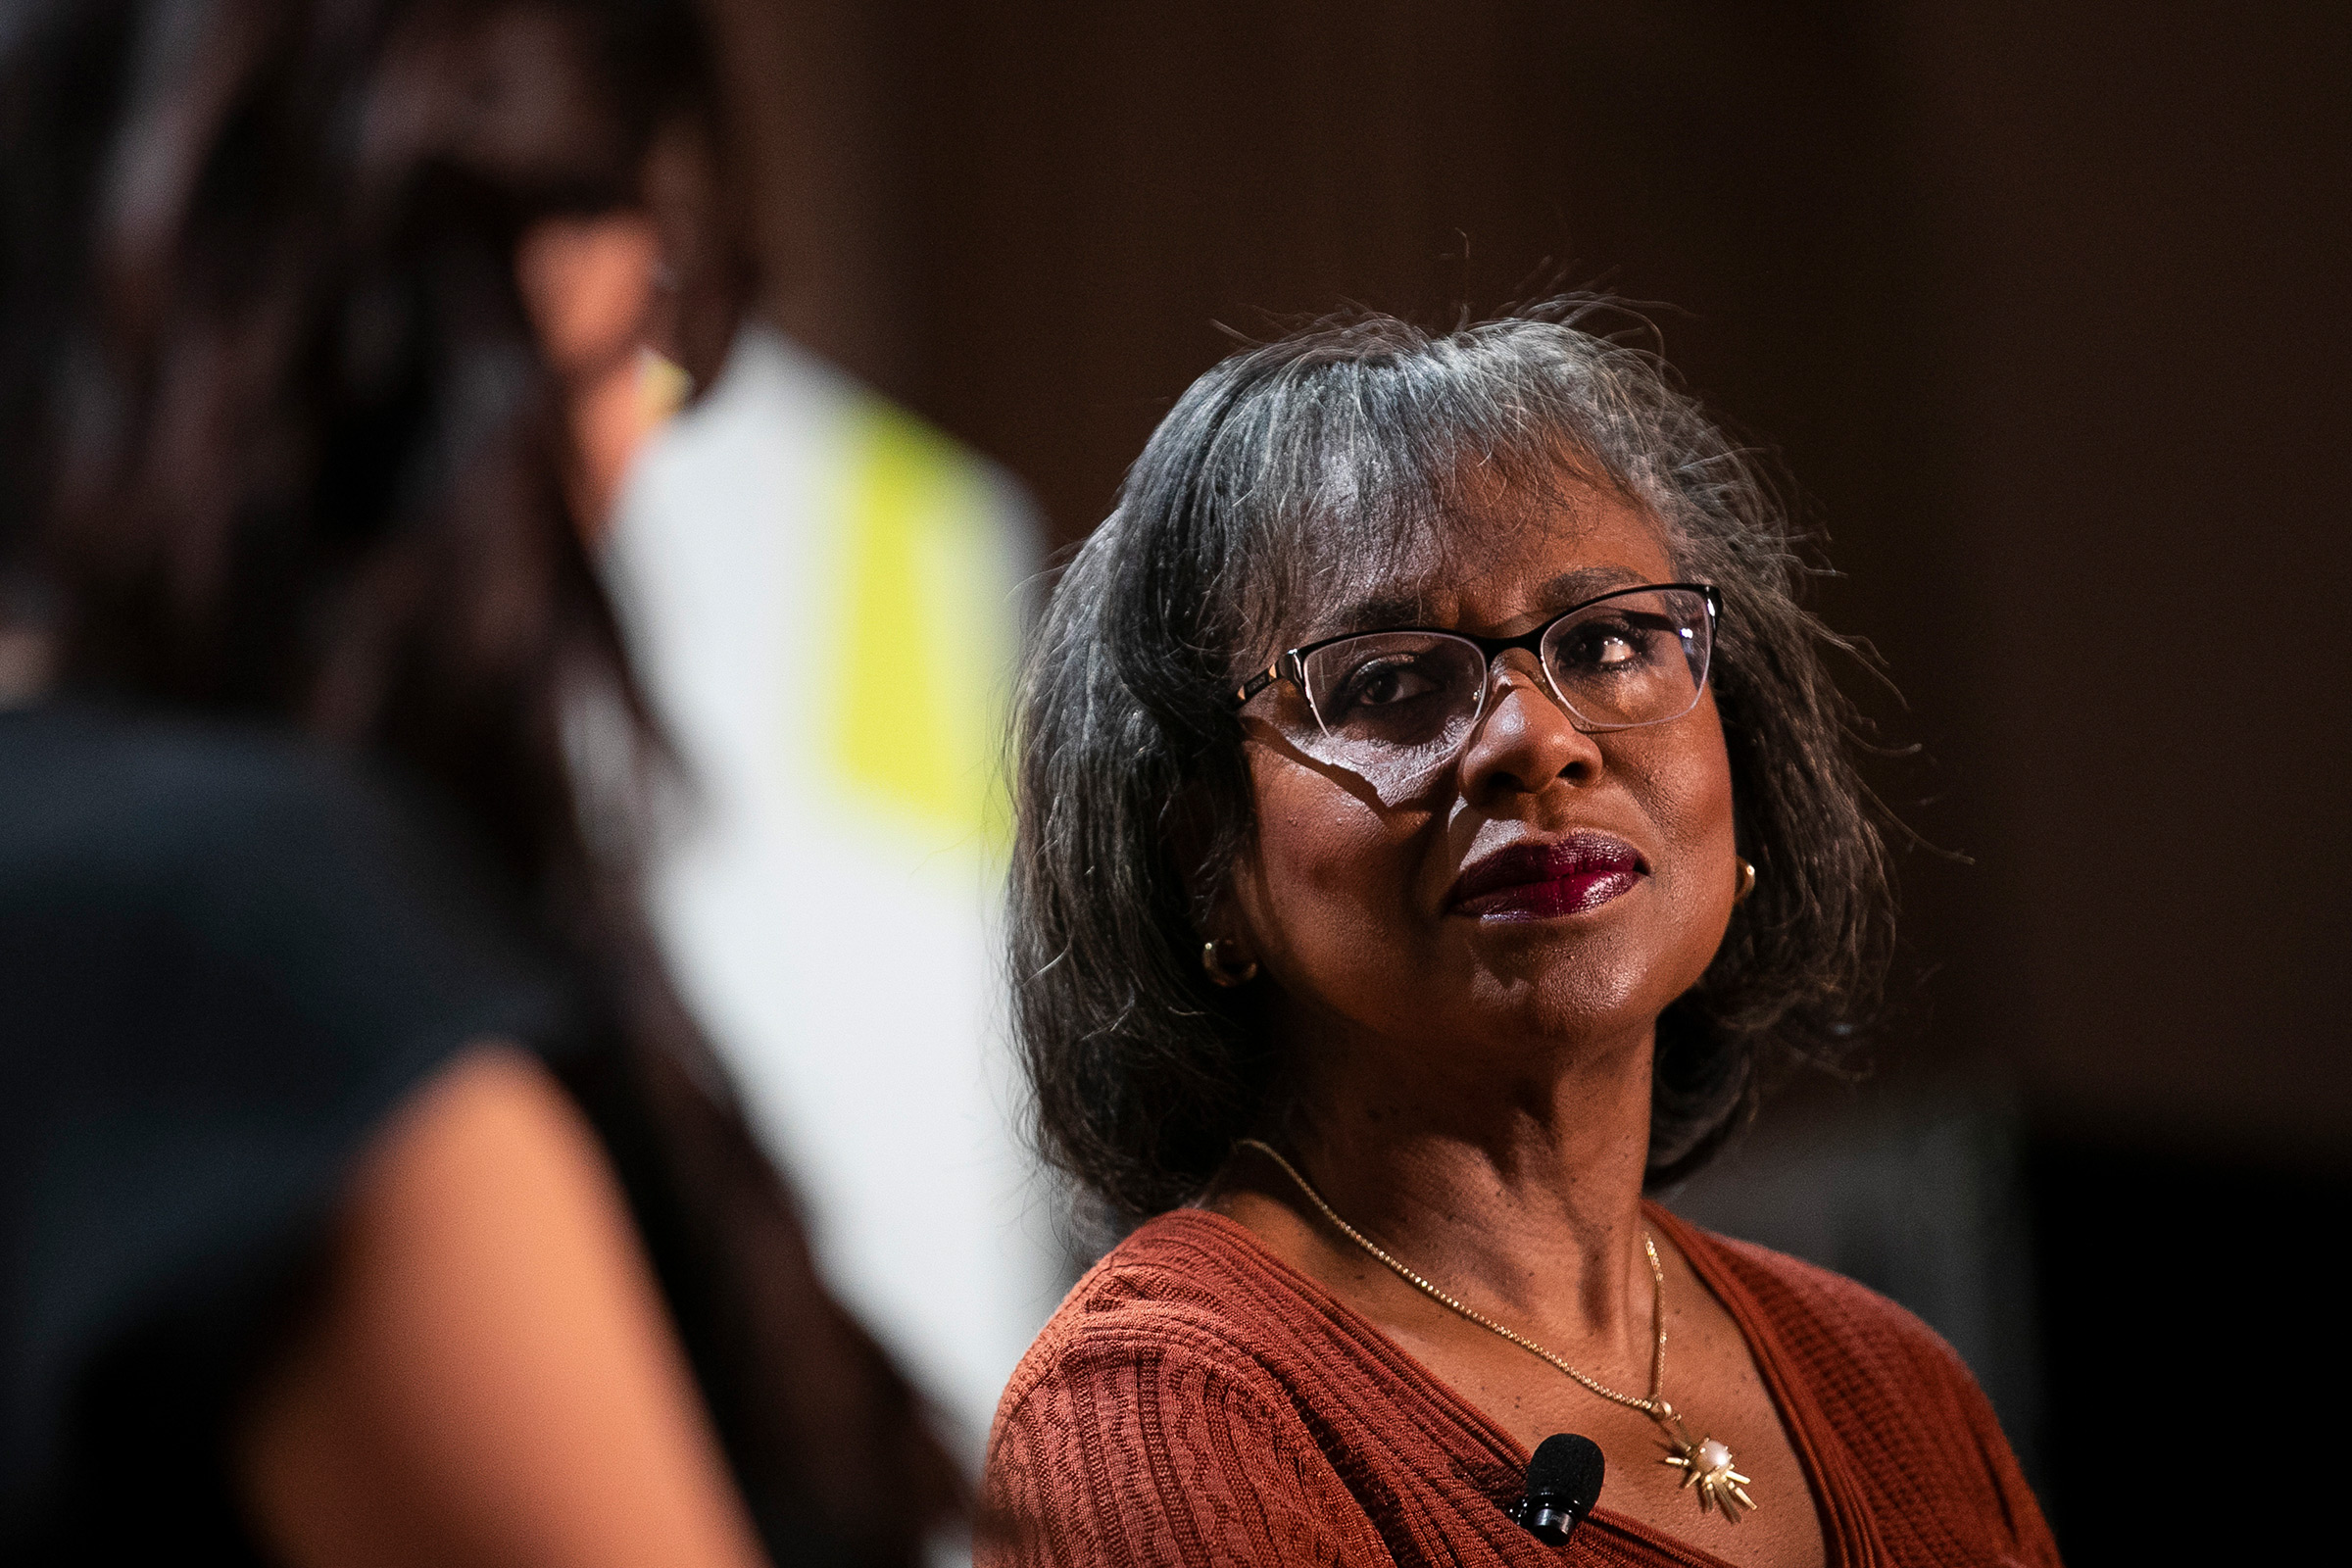 Anita Hill speaks during the New Rules Summit in Brooklyn, N.Y., on June 13, 2019. (Jeenah Moon—The New York Times/Redux)